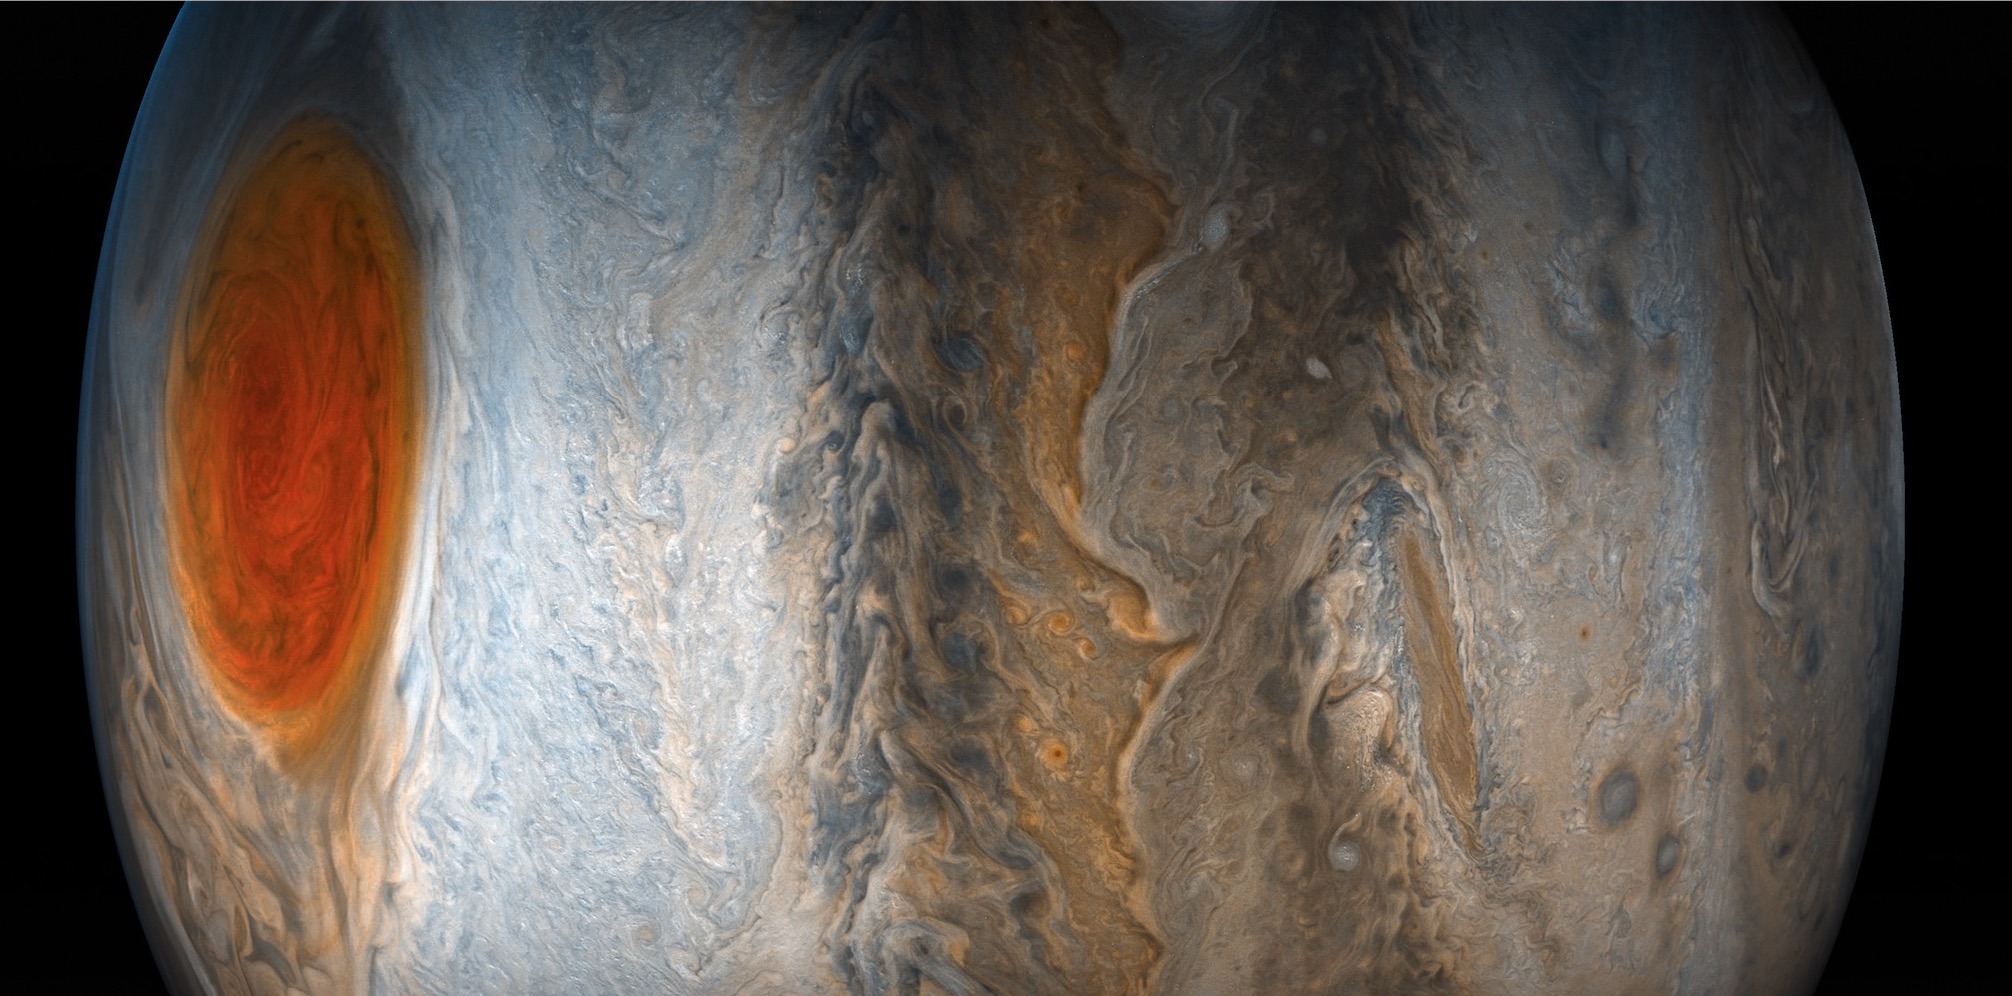 Check Out This Amazing Jupiter Wallpaper Picture From Junocam